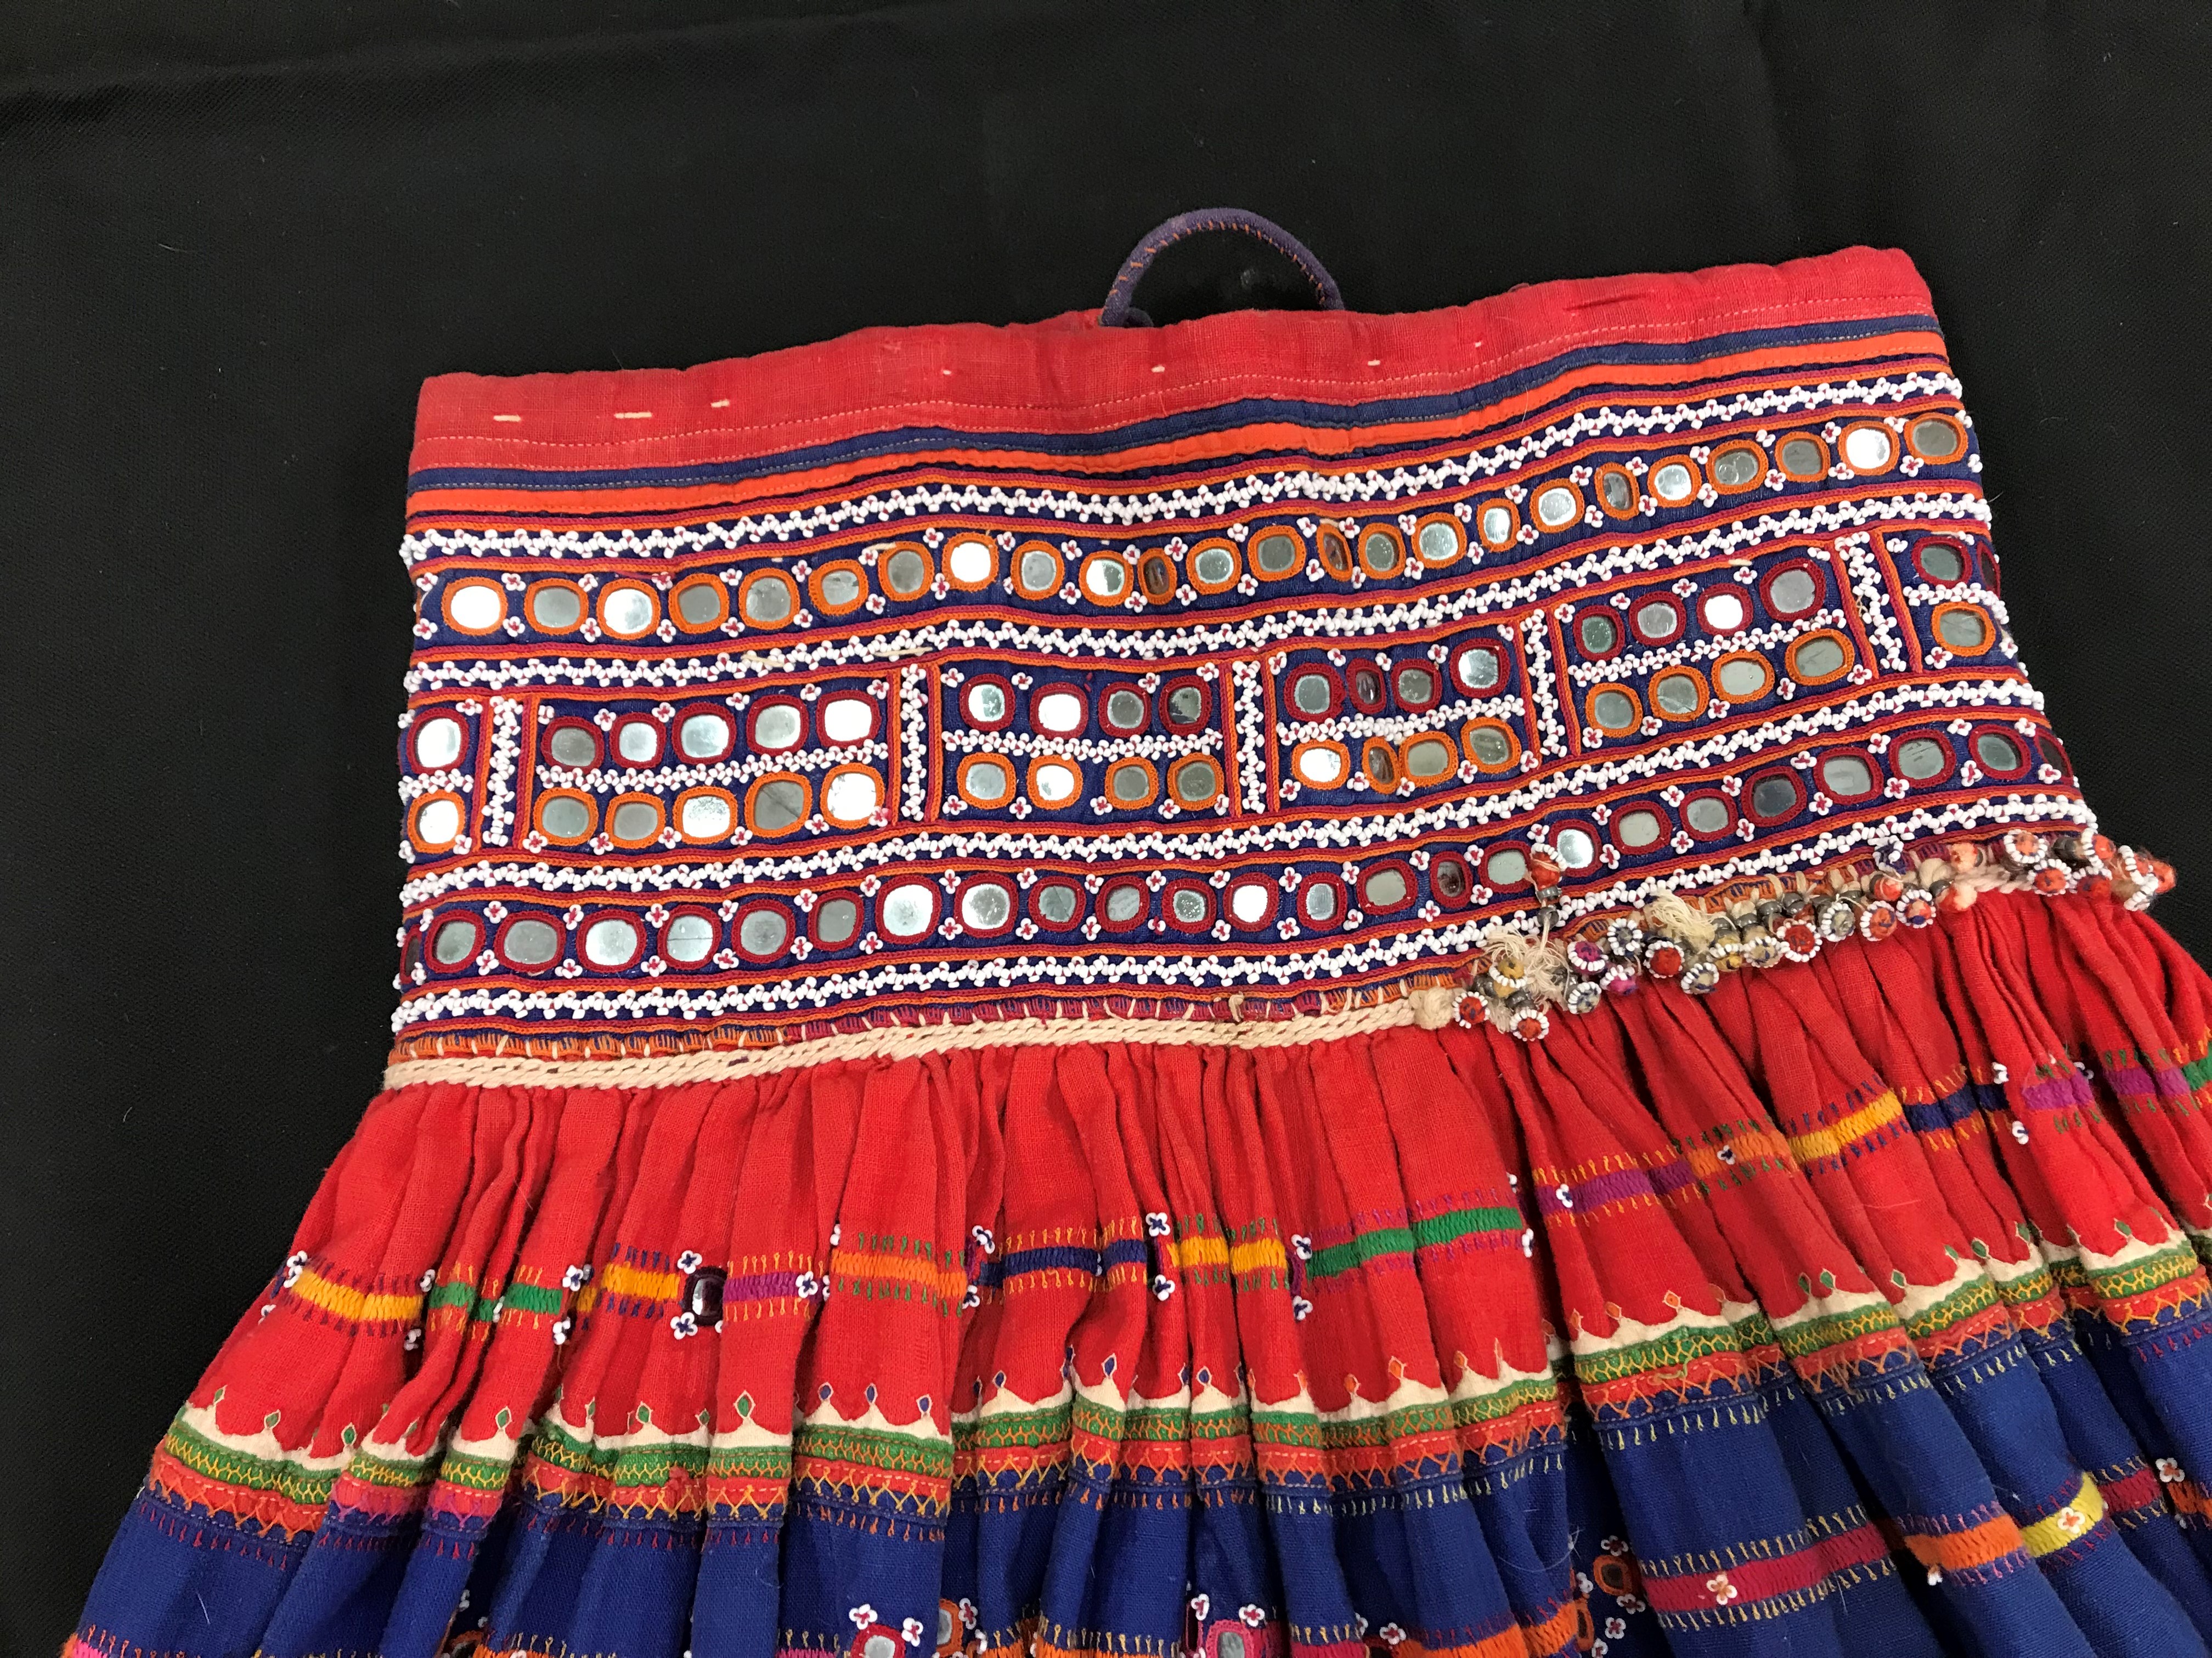 A Rajhistani skirt in red and blue stripes with overlaid embroidery and mirrored decorations, - Image 2 of 14